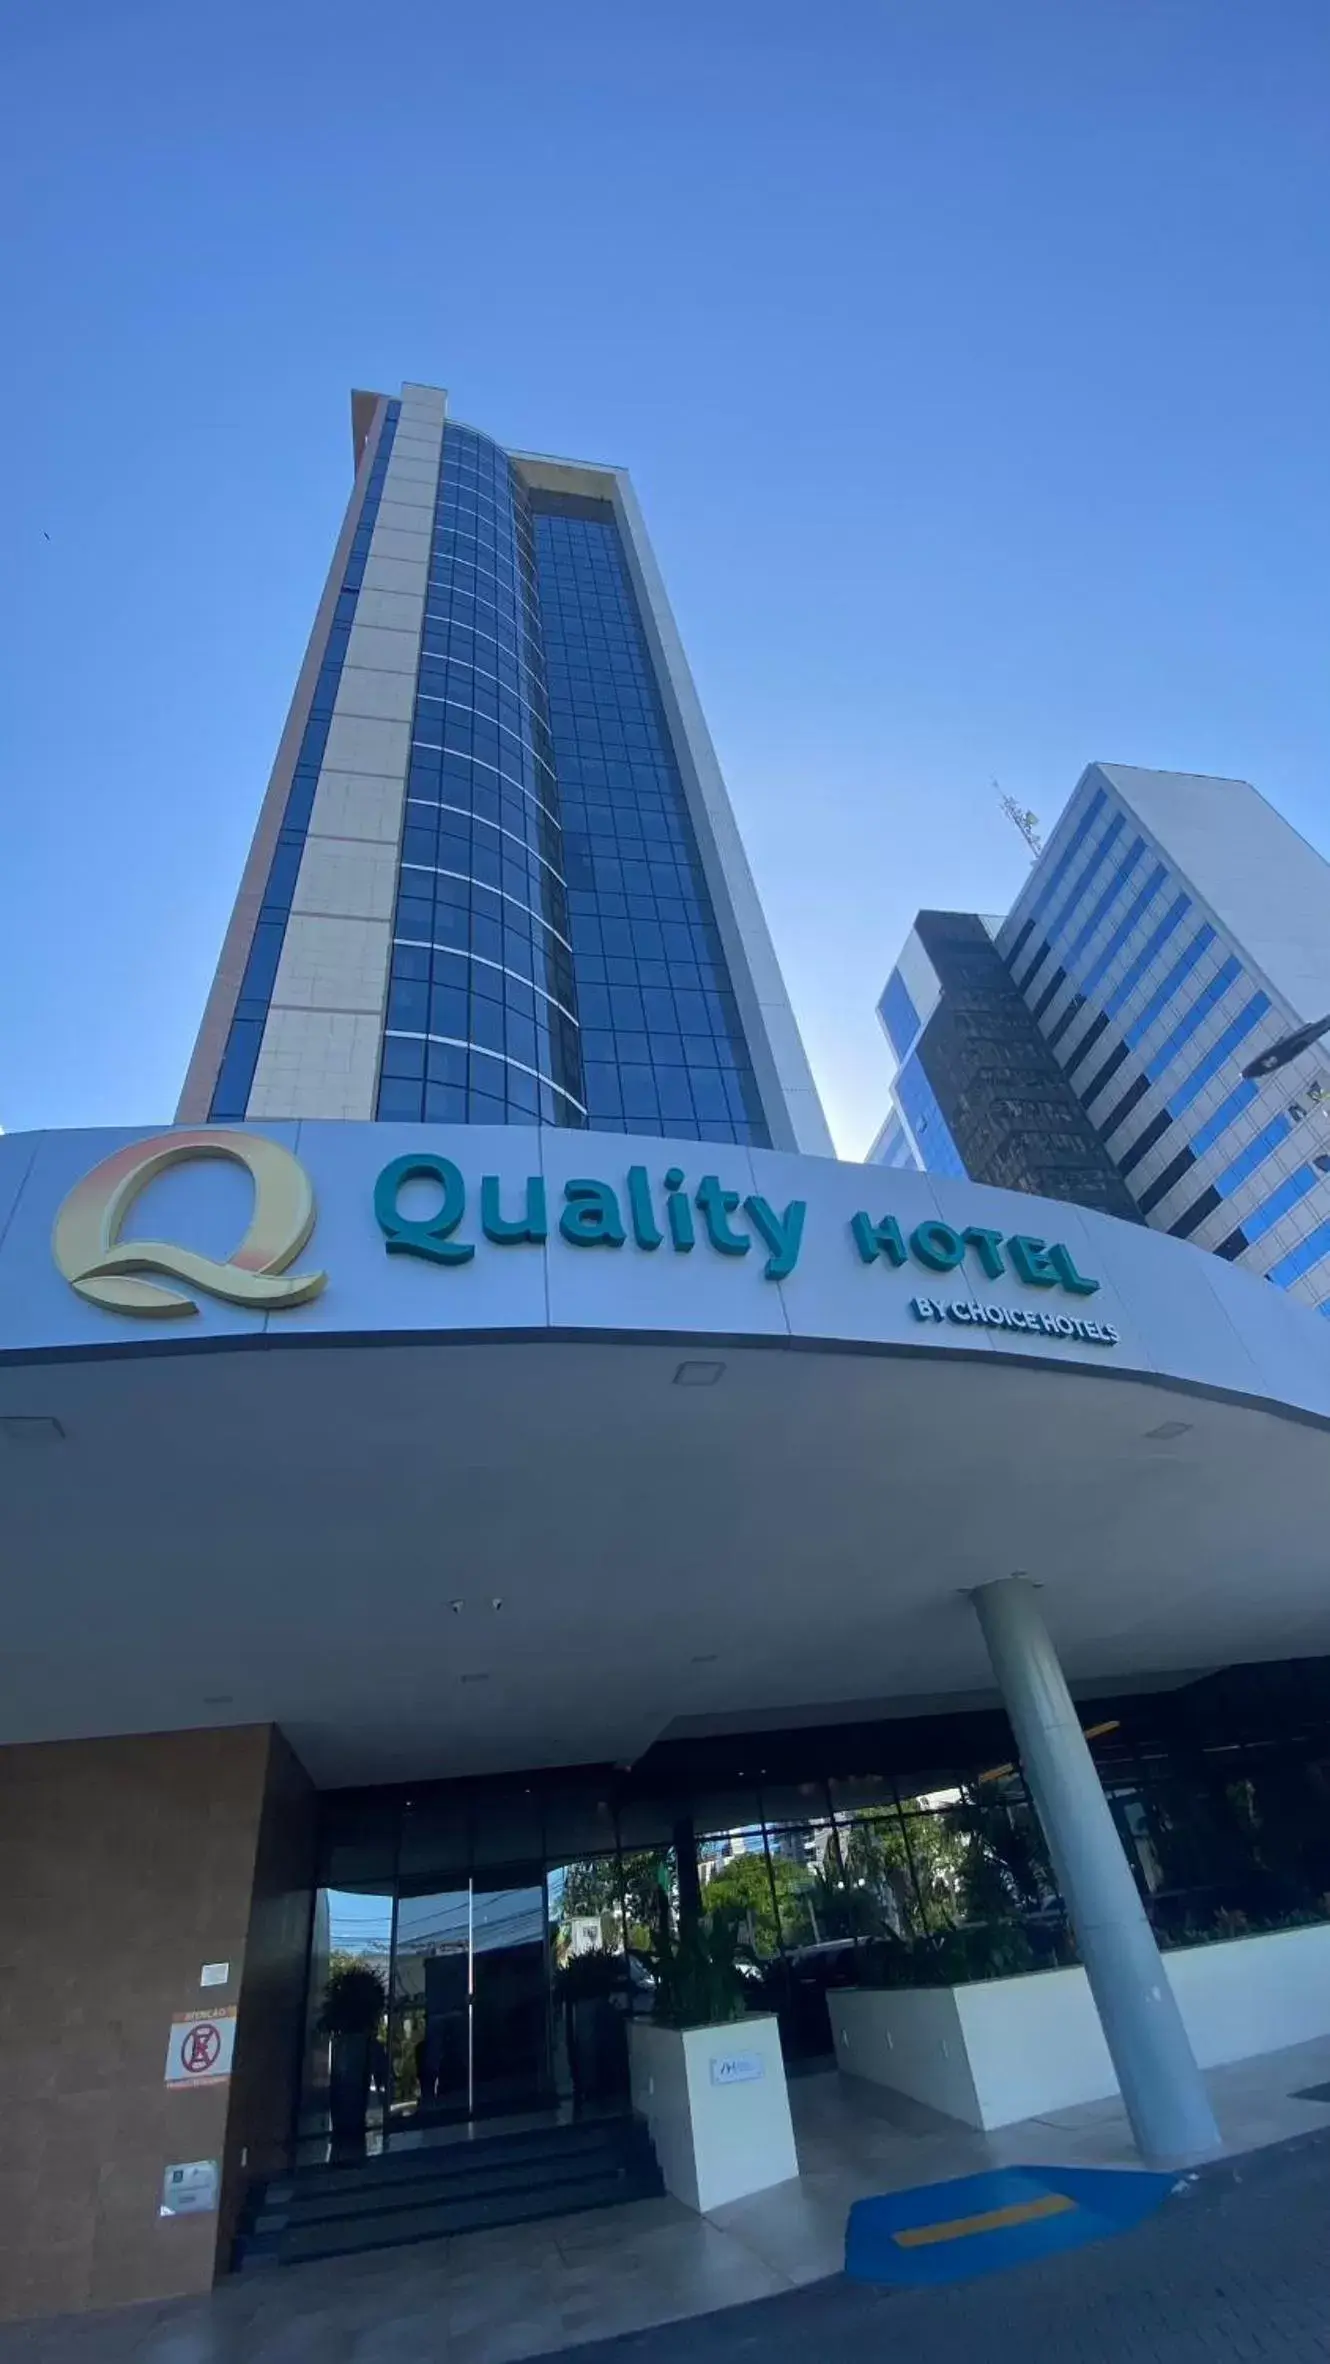 Property Building in Quality Hotel Manaus